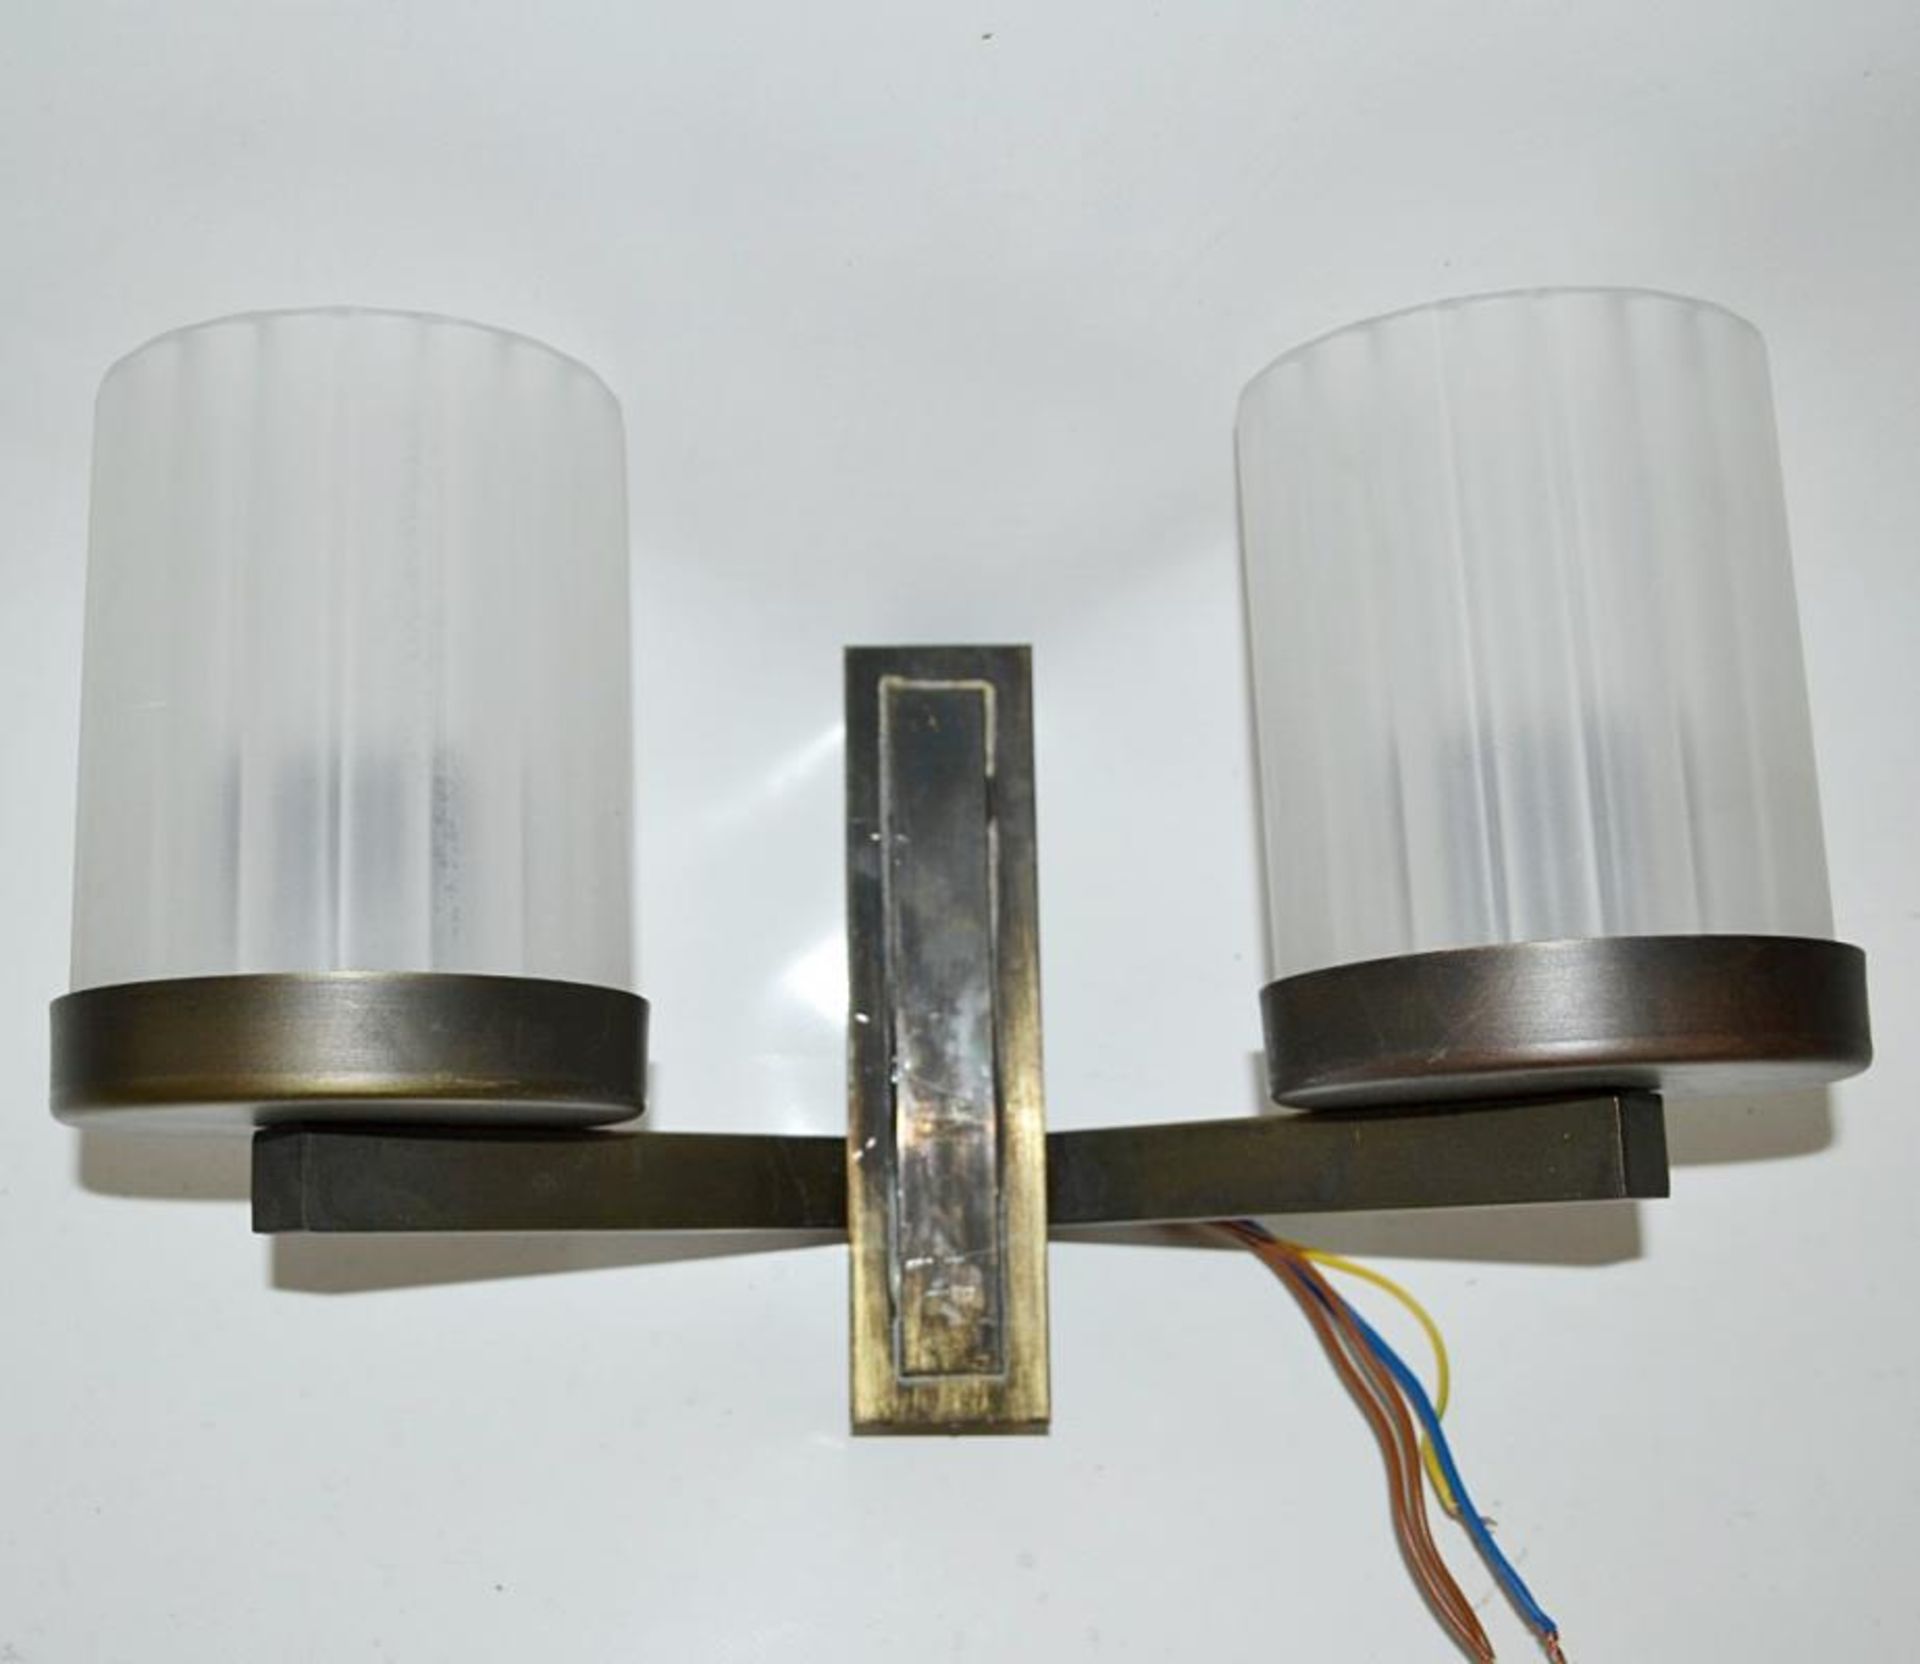 4 x Art Deco Style Wall Mounted Twin-Sconce Light Fittings In Brass - Recently Removed From A City C - Image 2 of 7